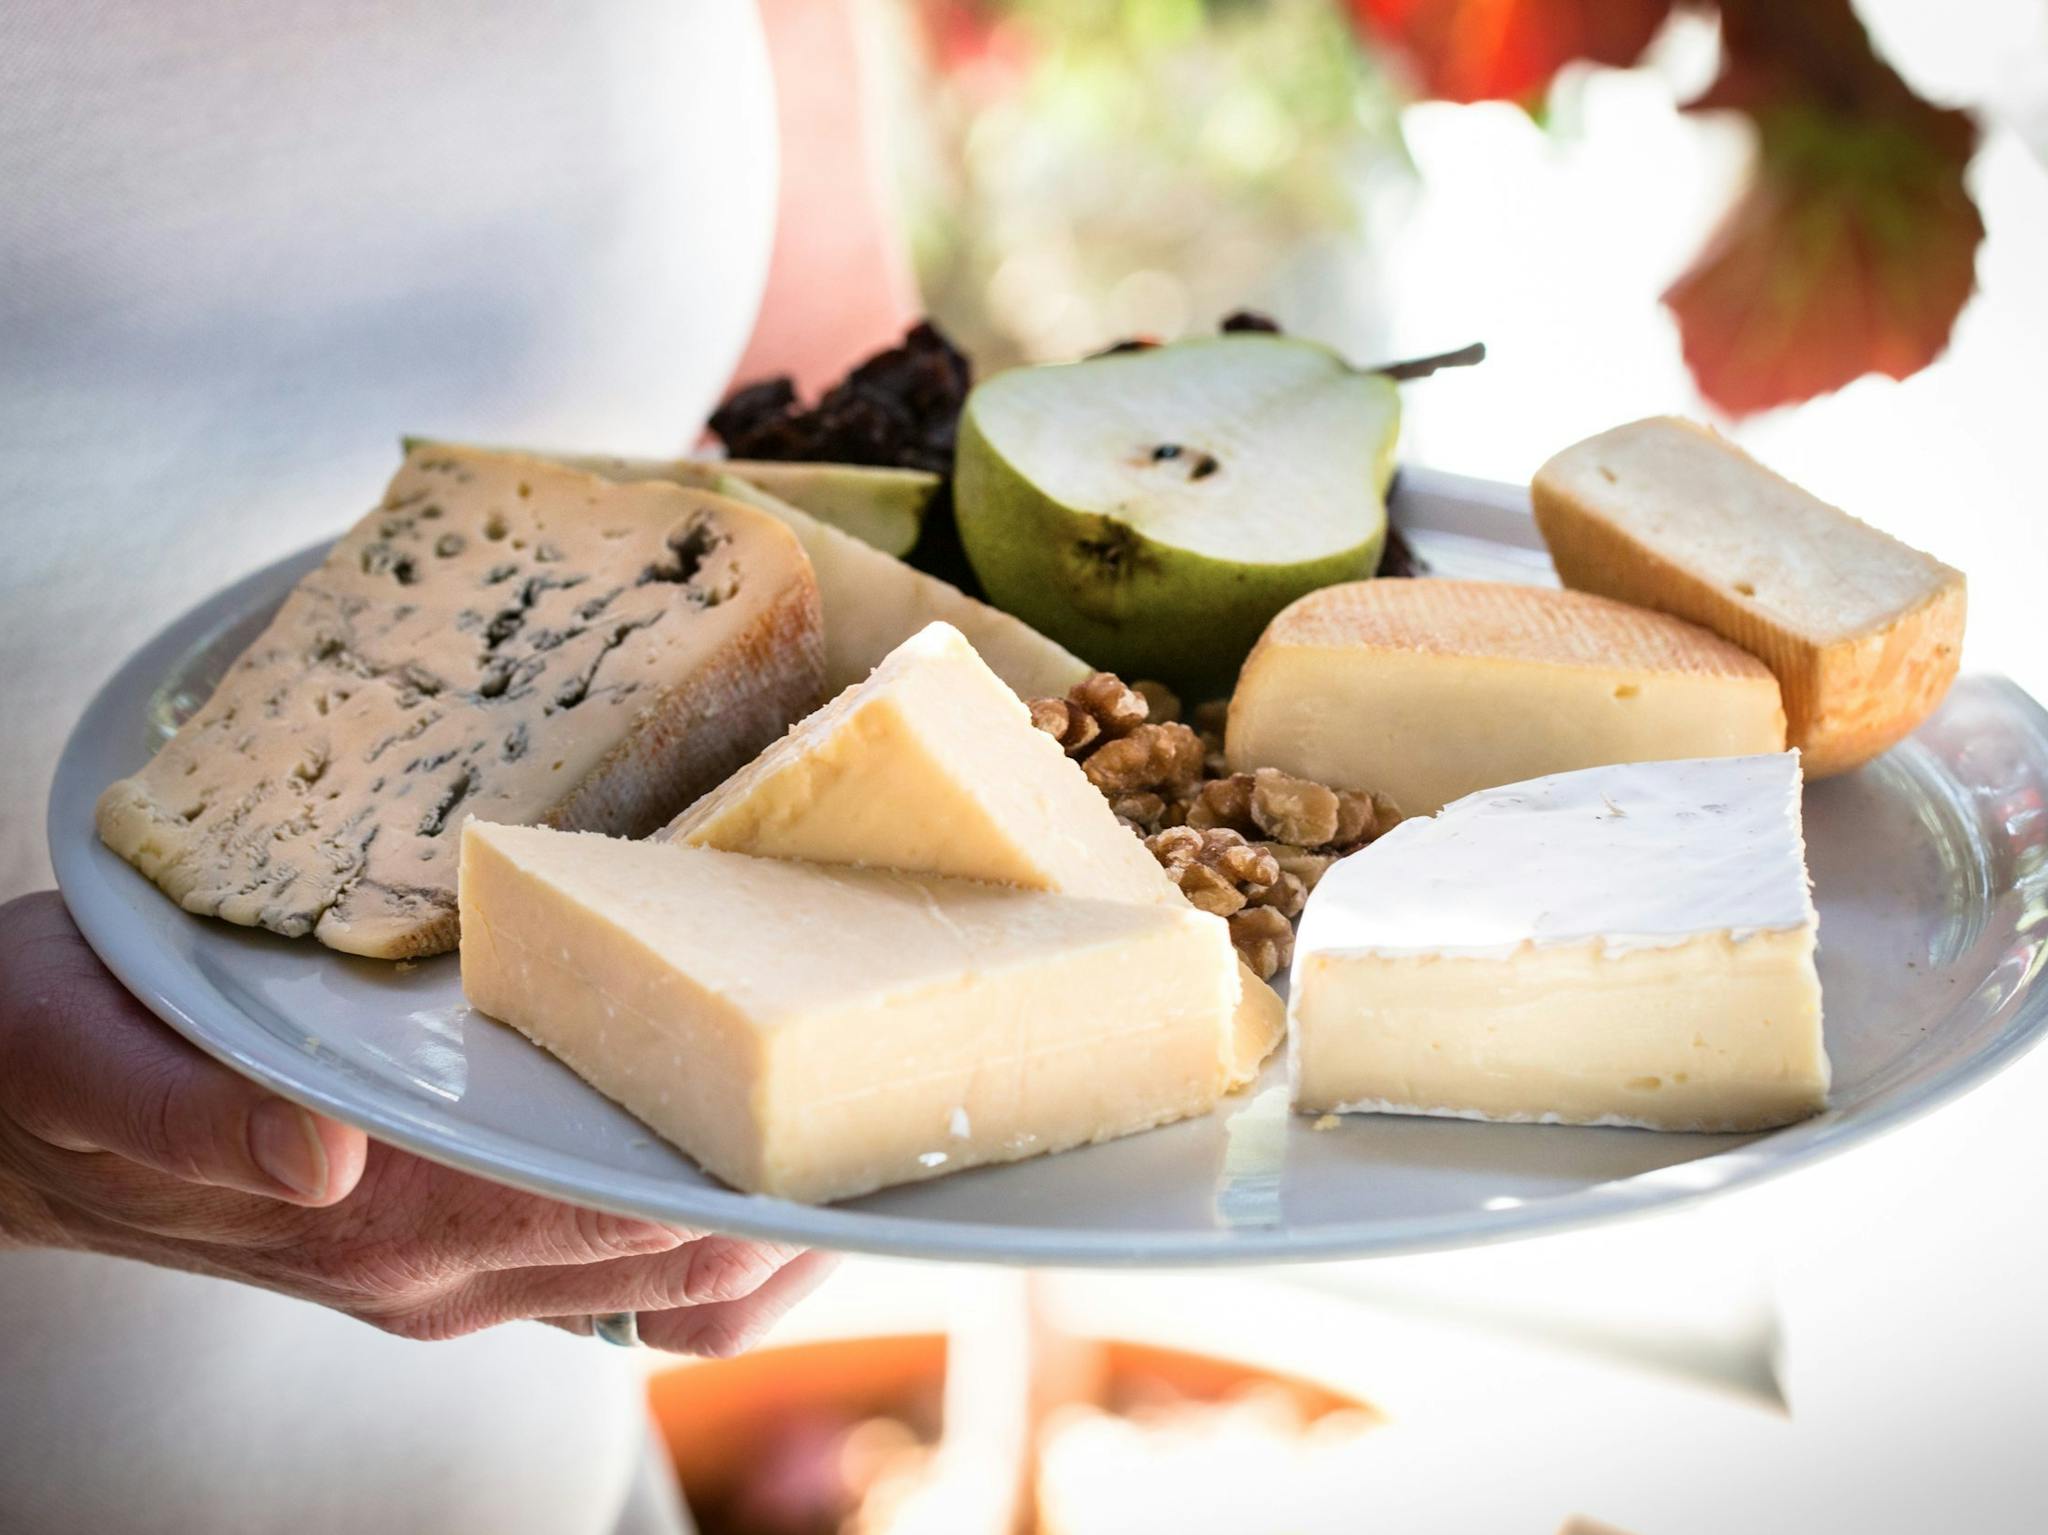 Cheese platter of farmhouse cheeses from the Milawa factory